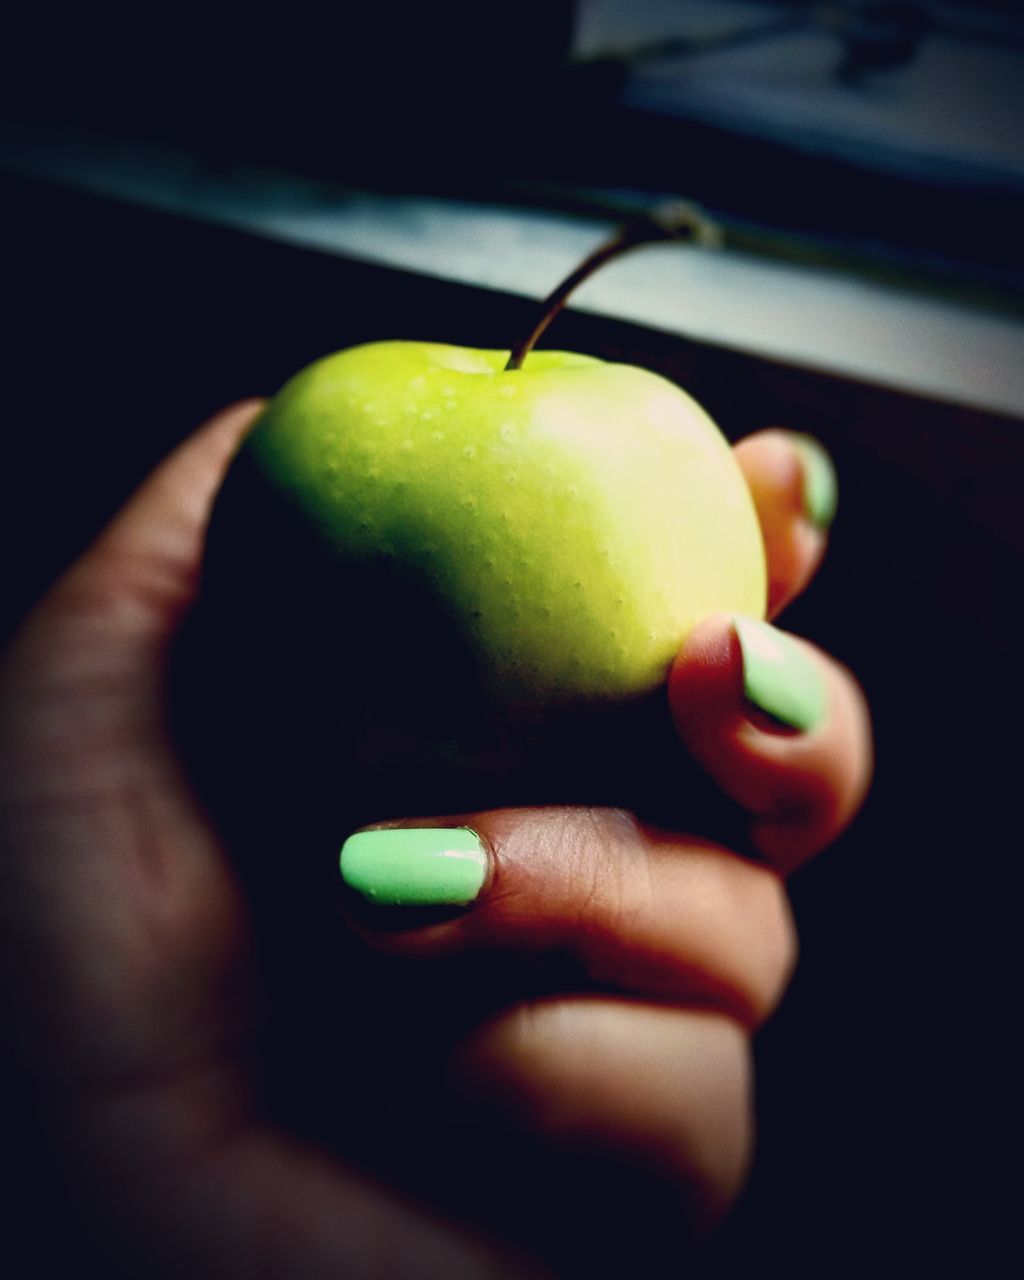 CLOSE-UP OF HAND HOLDING APPLES